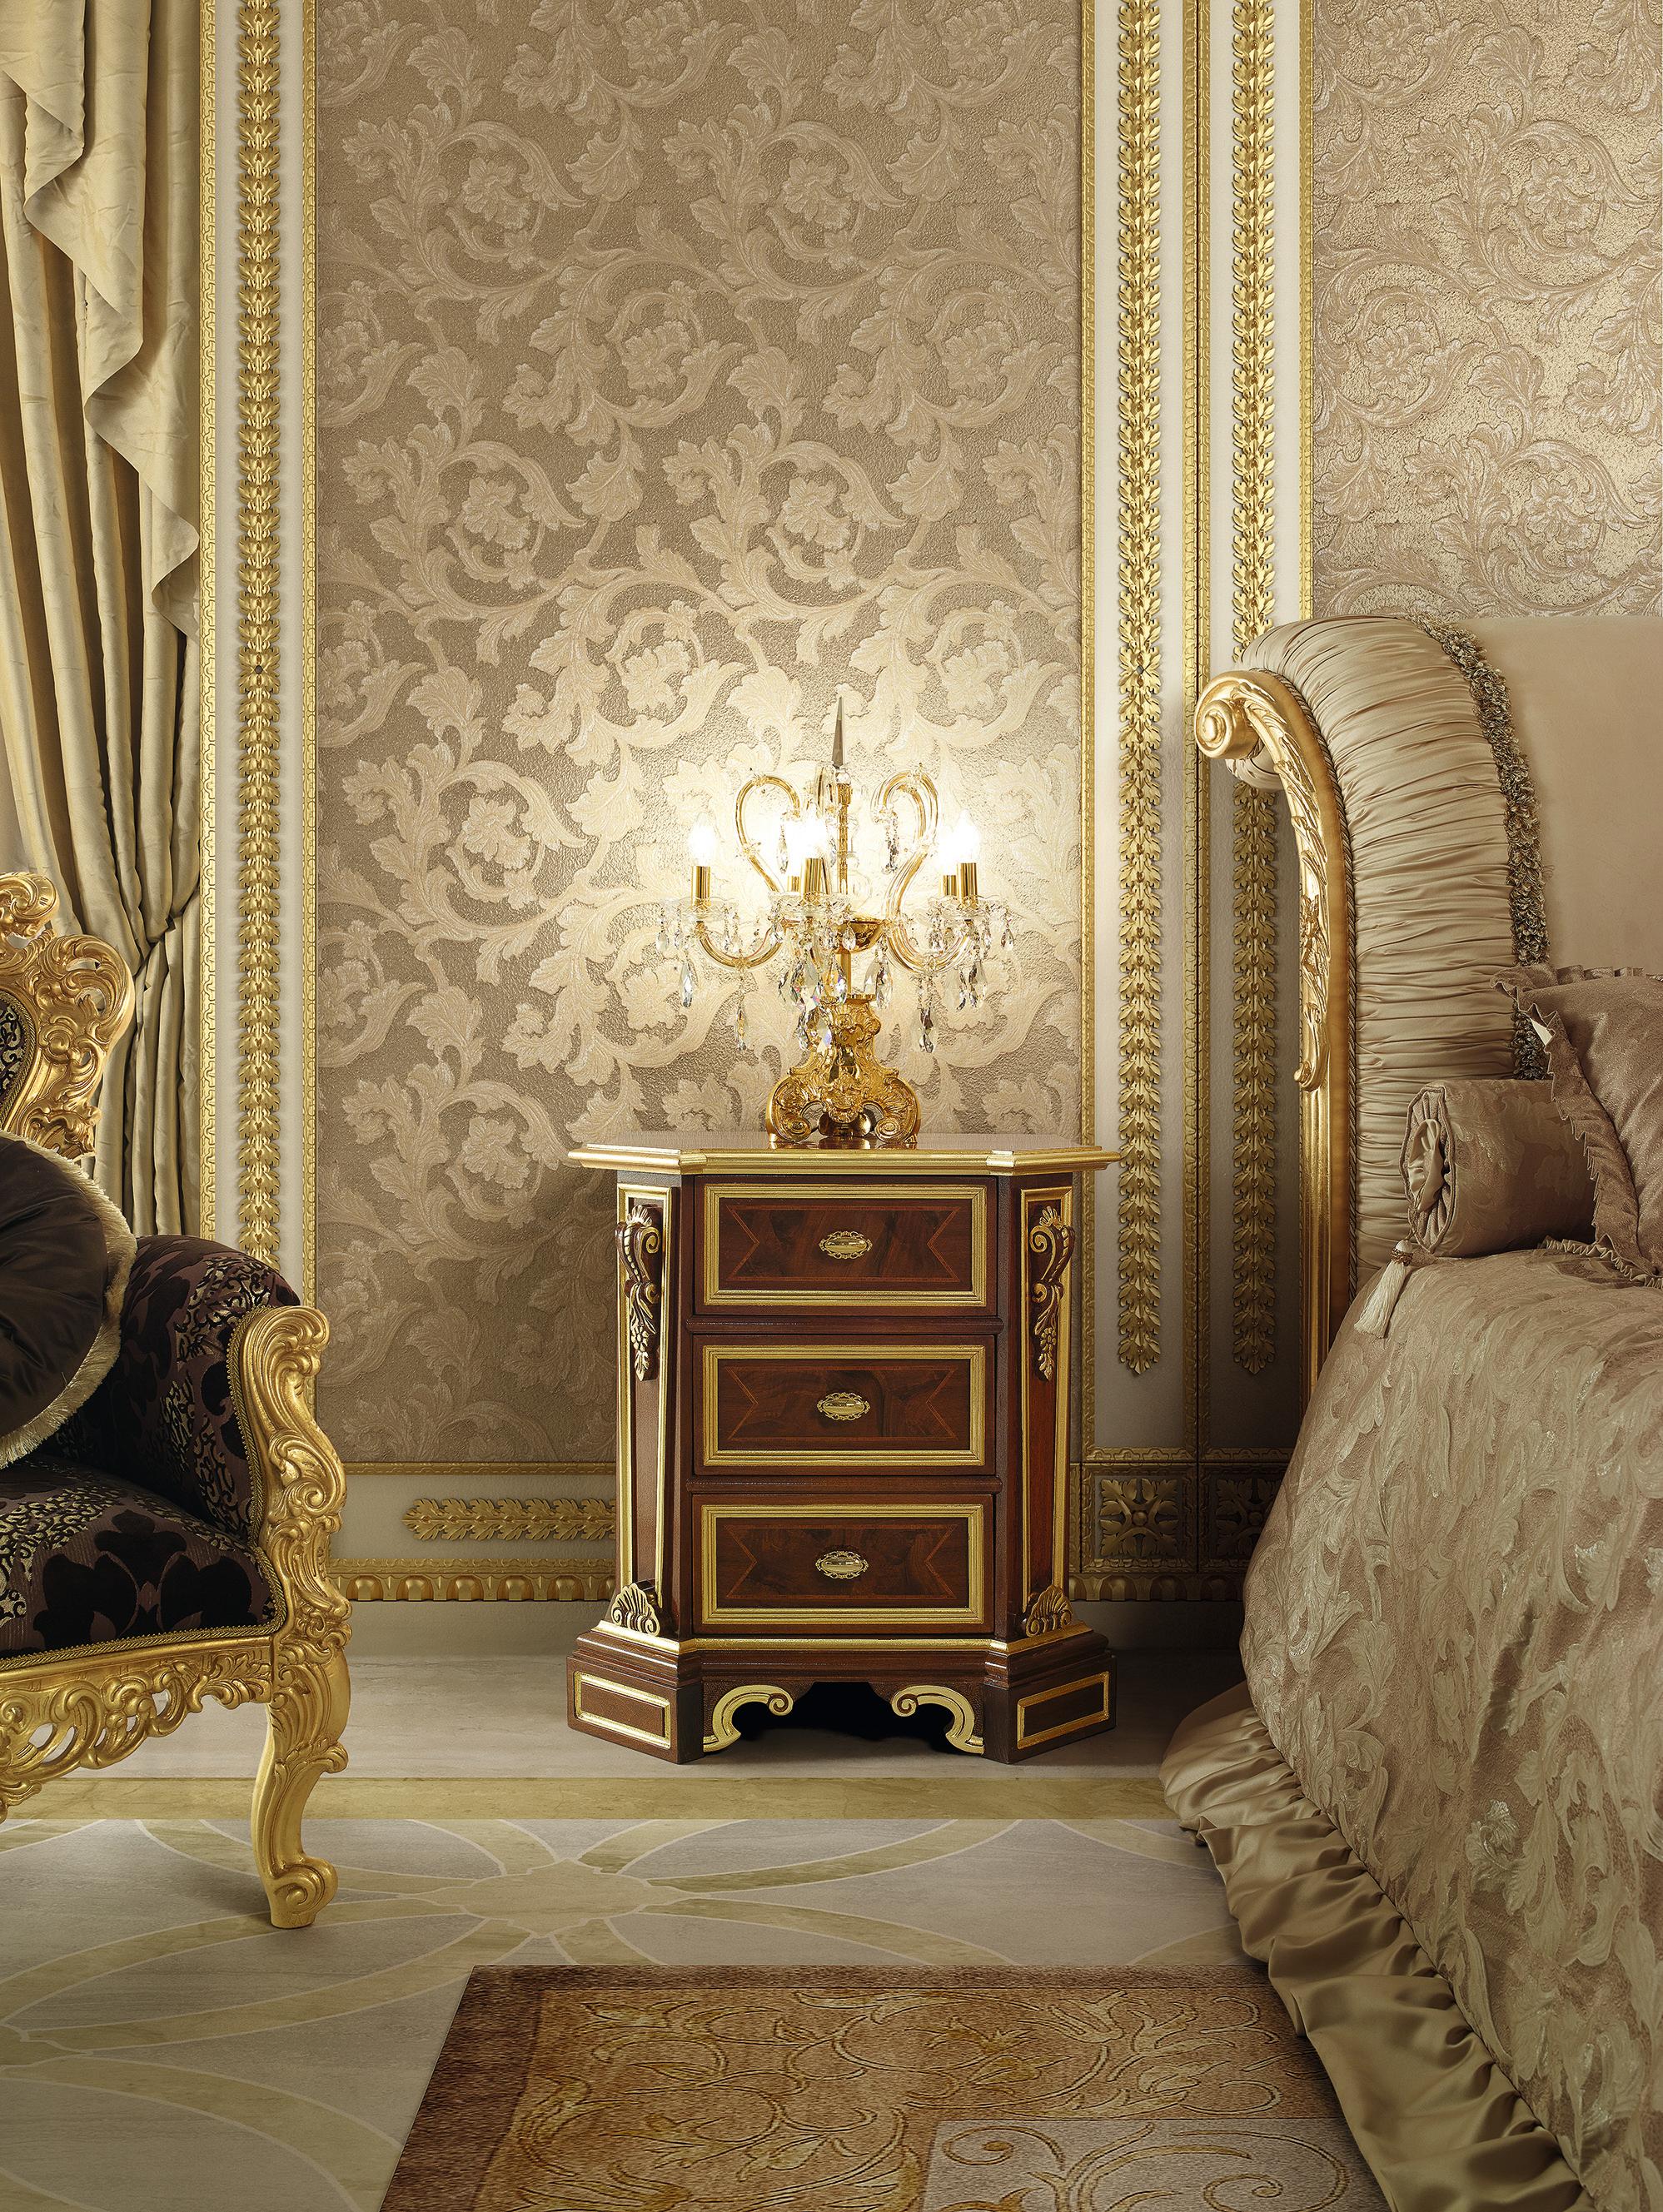 Preciously designed squared classic night stand with three drawers by Modenese Gastone Interiors. The precious carvings in this night table make it perfect for beds with carved headboards and high-end wardrobes, cabinets or credenzas, and the gold